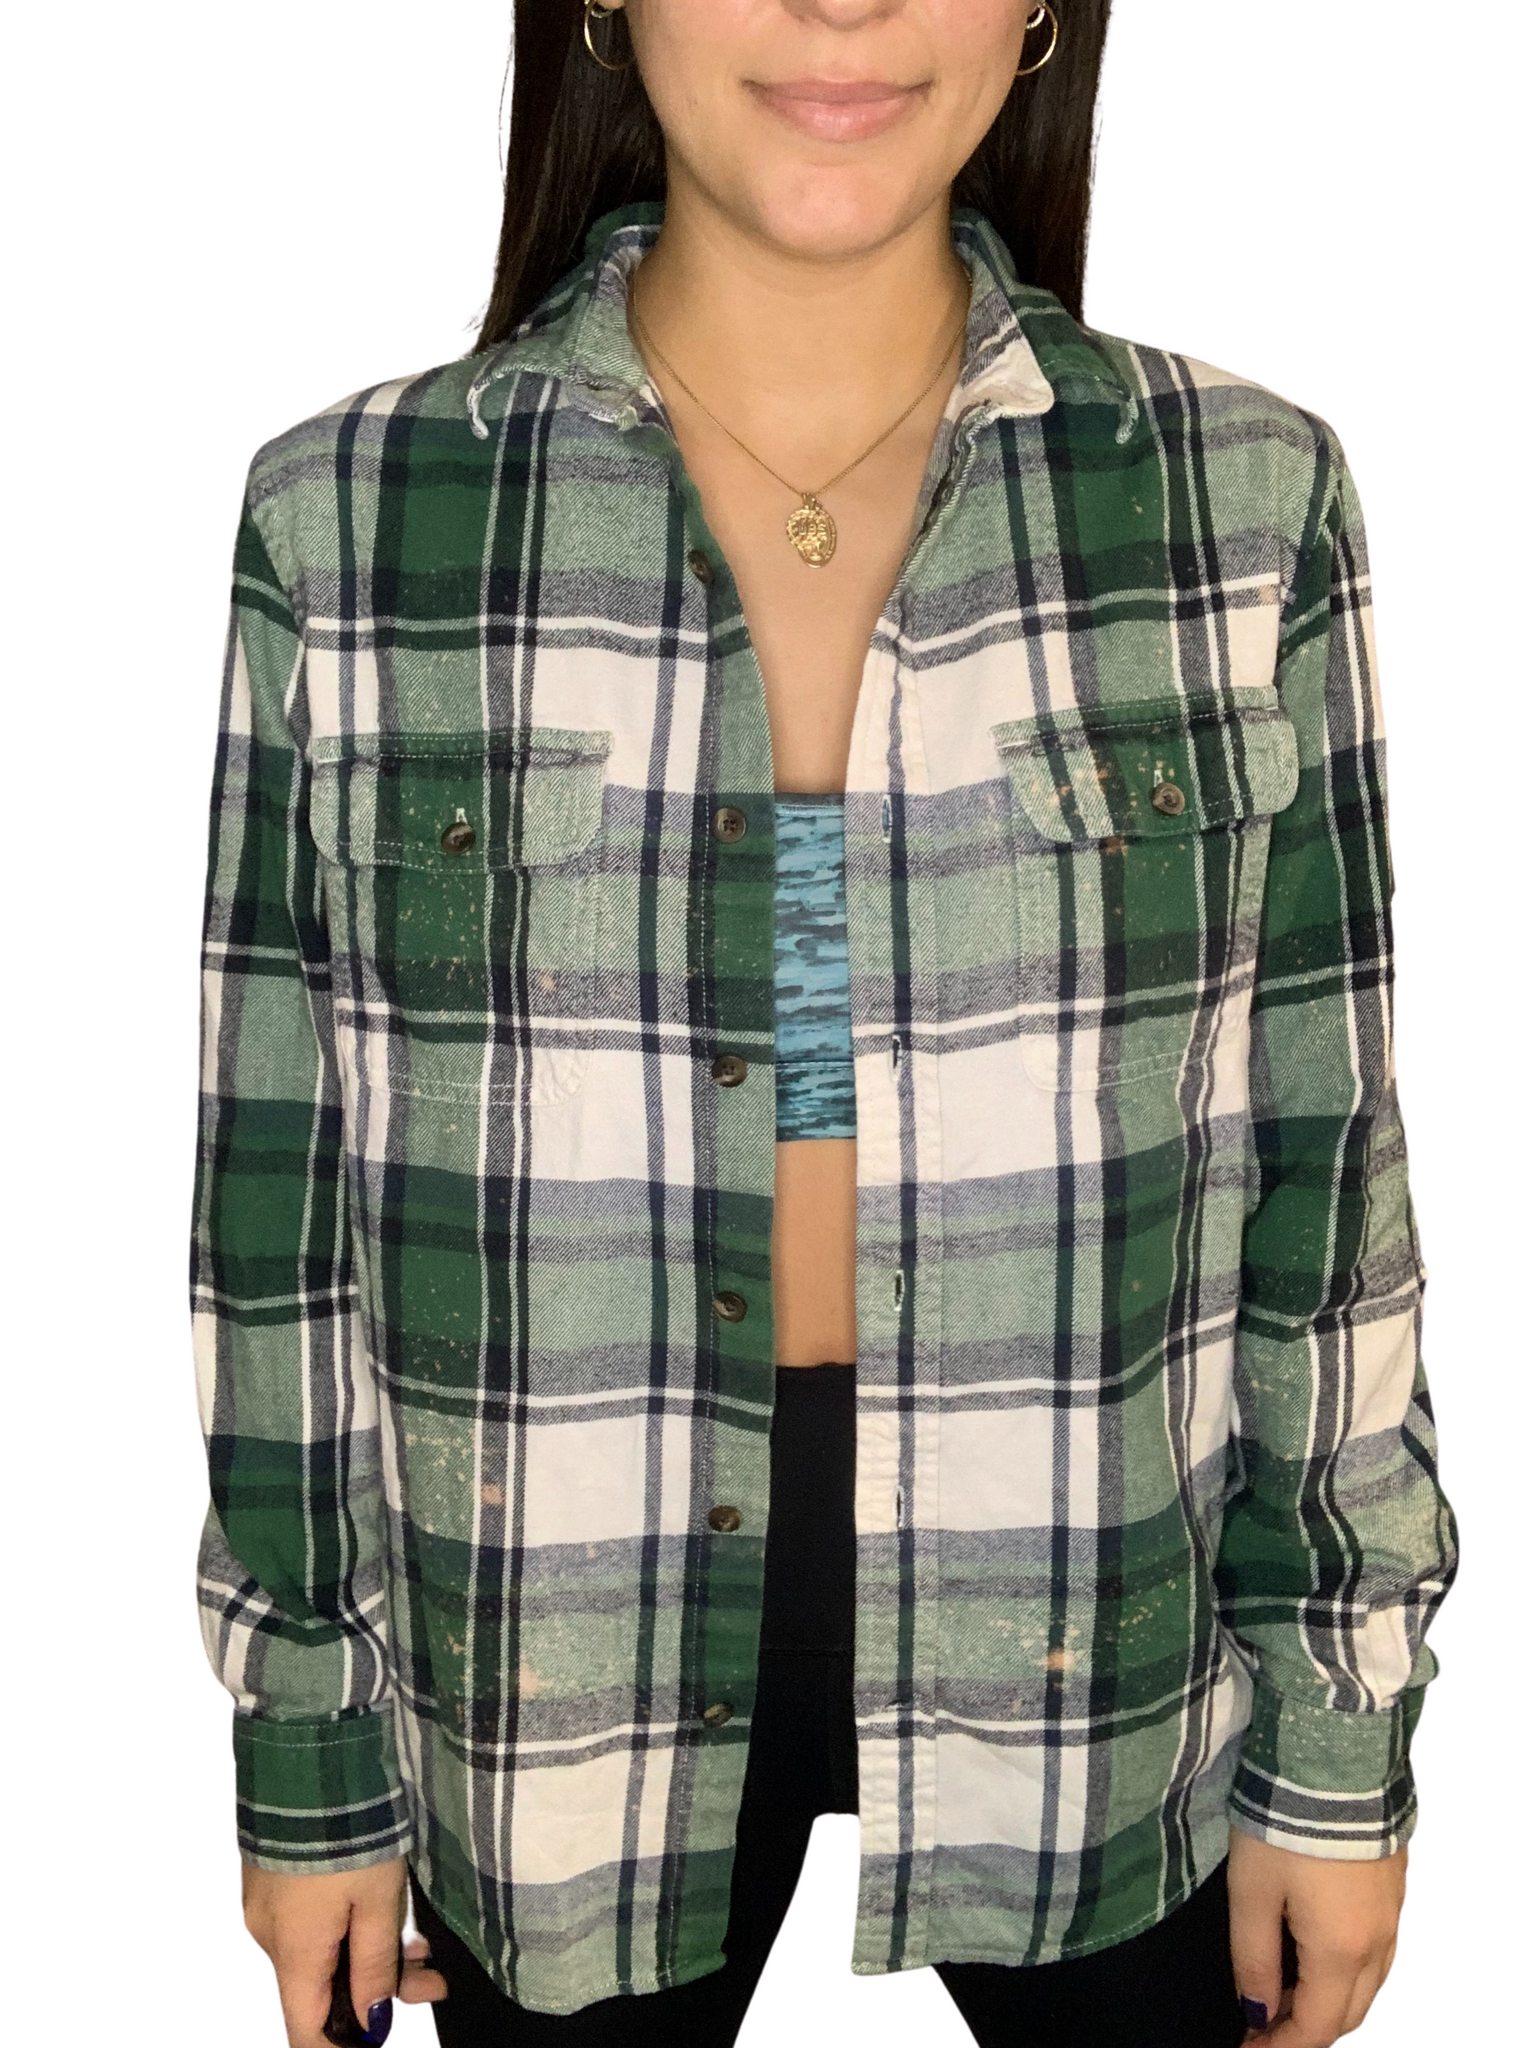 seattle mariners flannel shirt